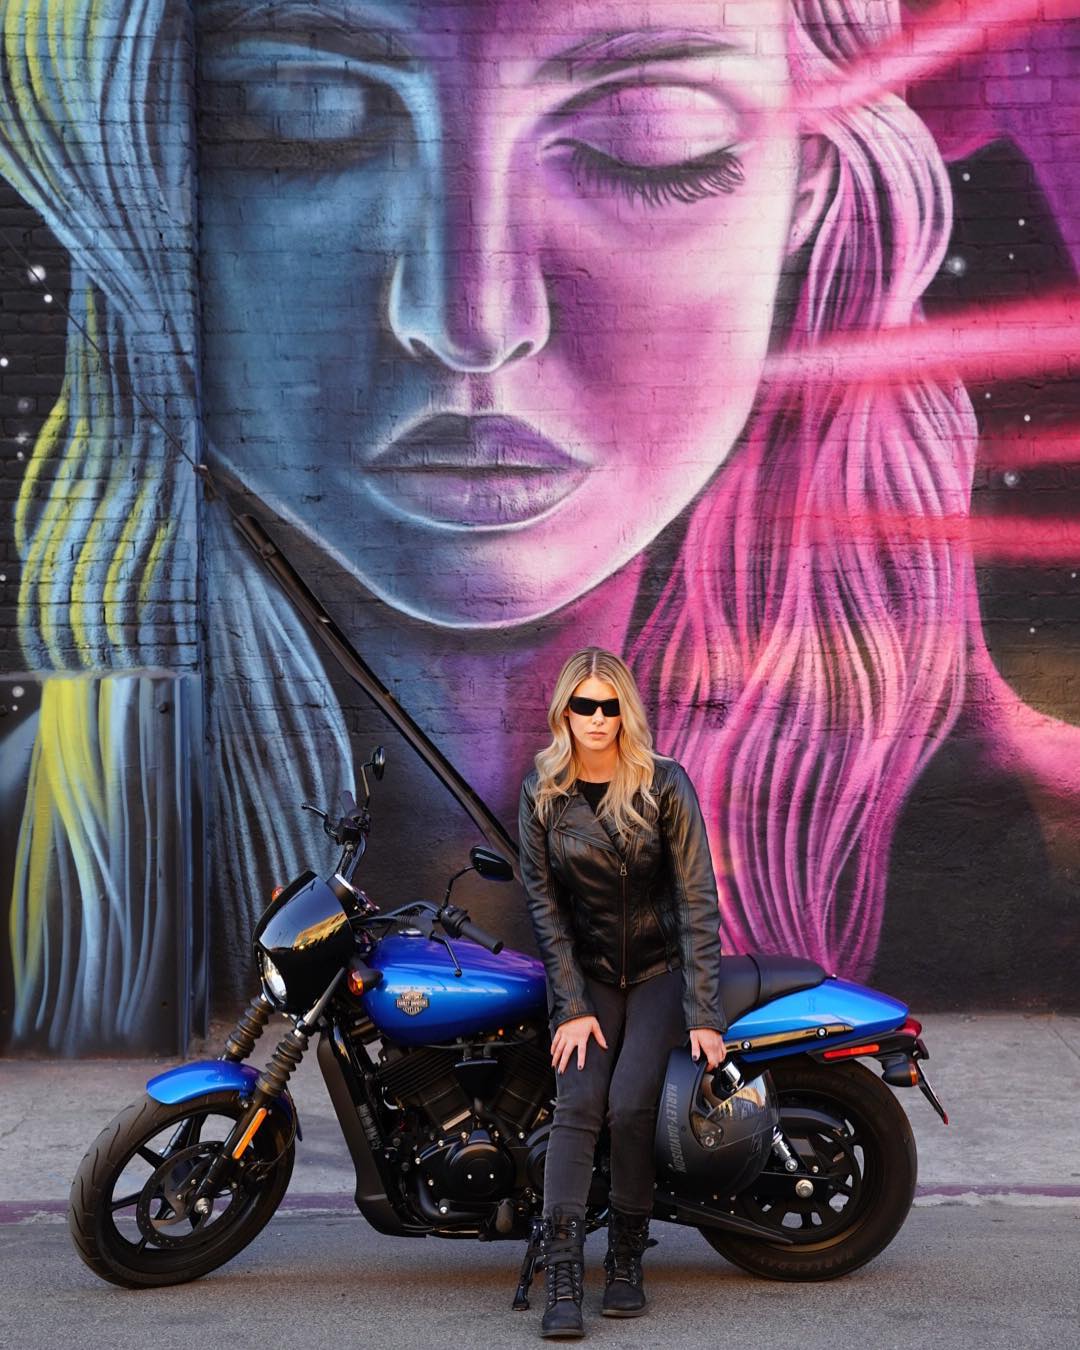 Kelly Rizzo Shooting For Harley Davidson. know more about her net worth, earnings, income, remuneration, salary, property, total assets, wealth and other insurance and bonds